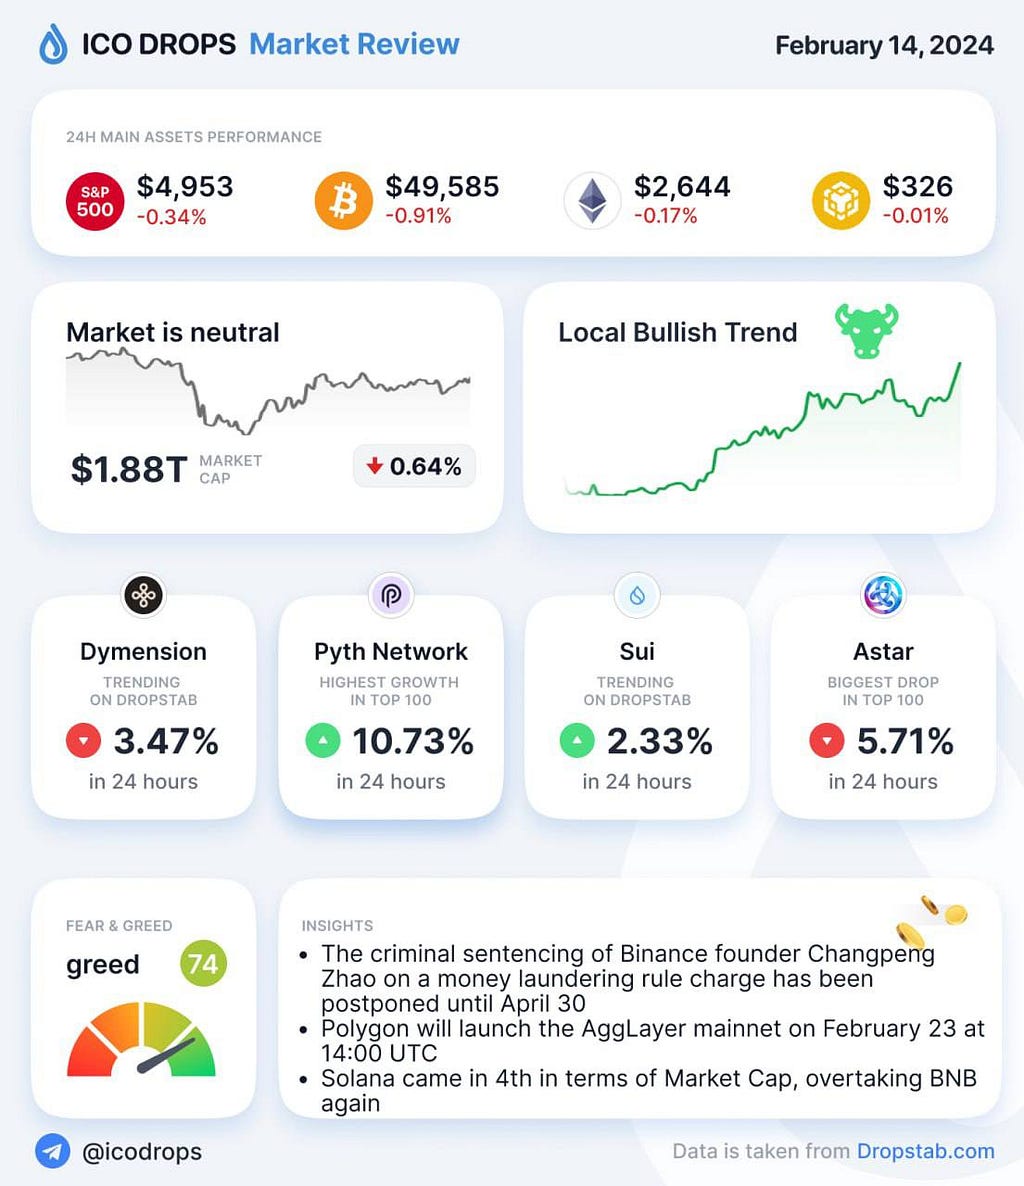 Market review indicates minor declines in S&P 500, Bitcoin, and Ethereum, with a neutral market cap decrease. Dymention, Pyth Network, and Sui show growth, while Astar drops. Market sentiment is greedy.